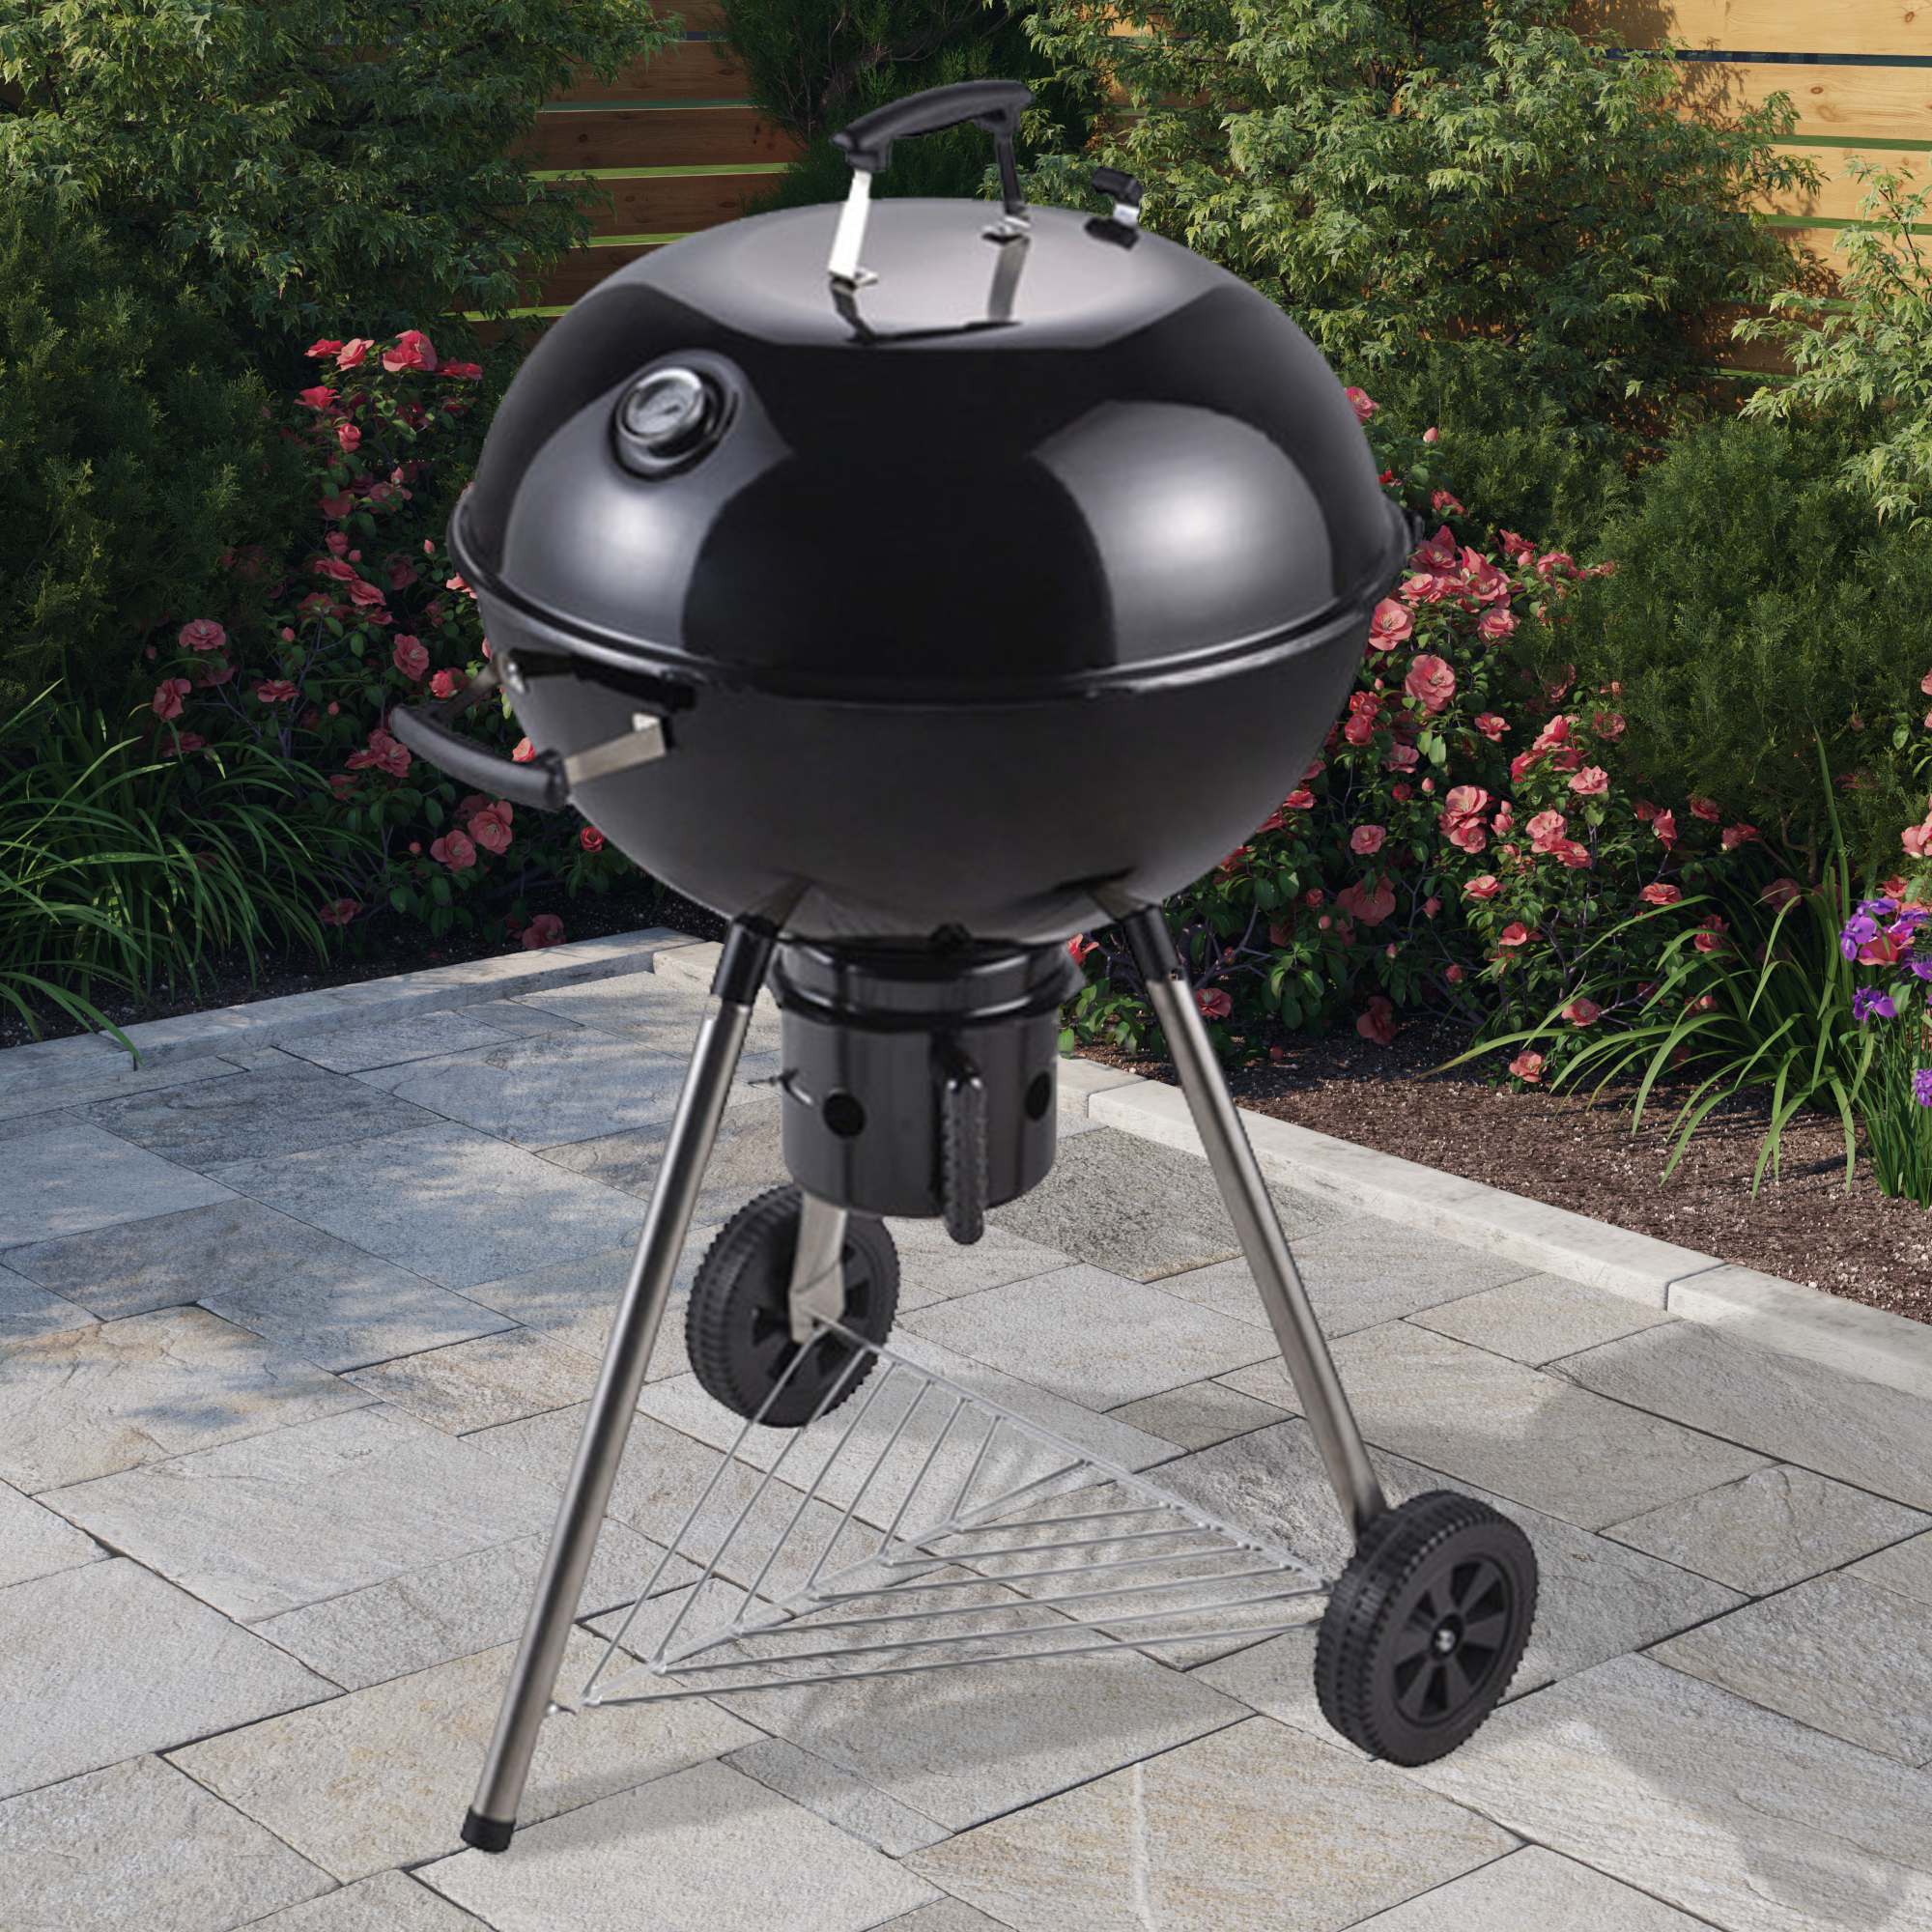 Image of BillyOh Kettle Black Charcoal BBQ - Kettle BBQ